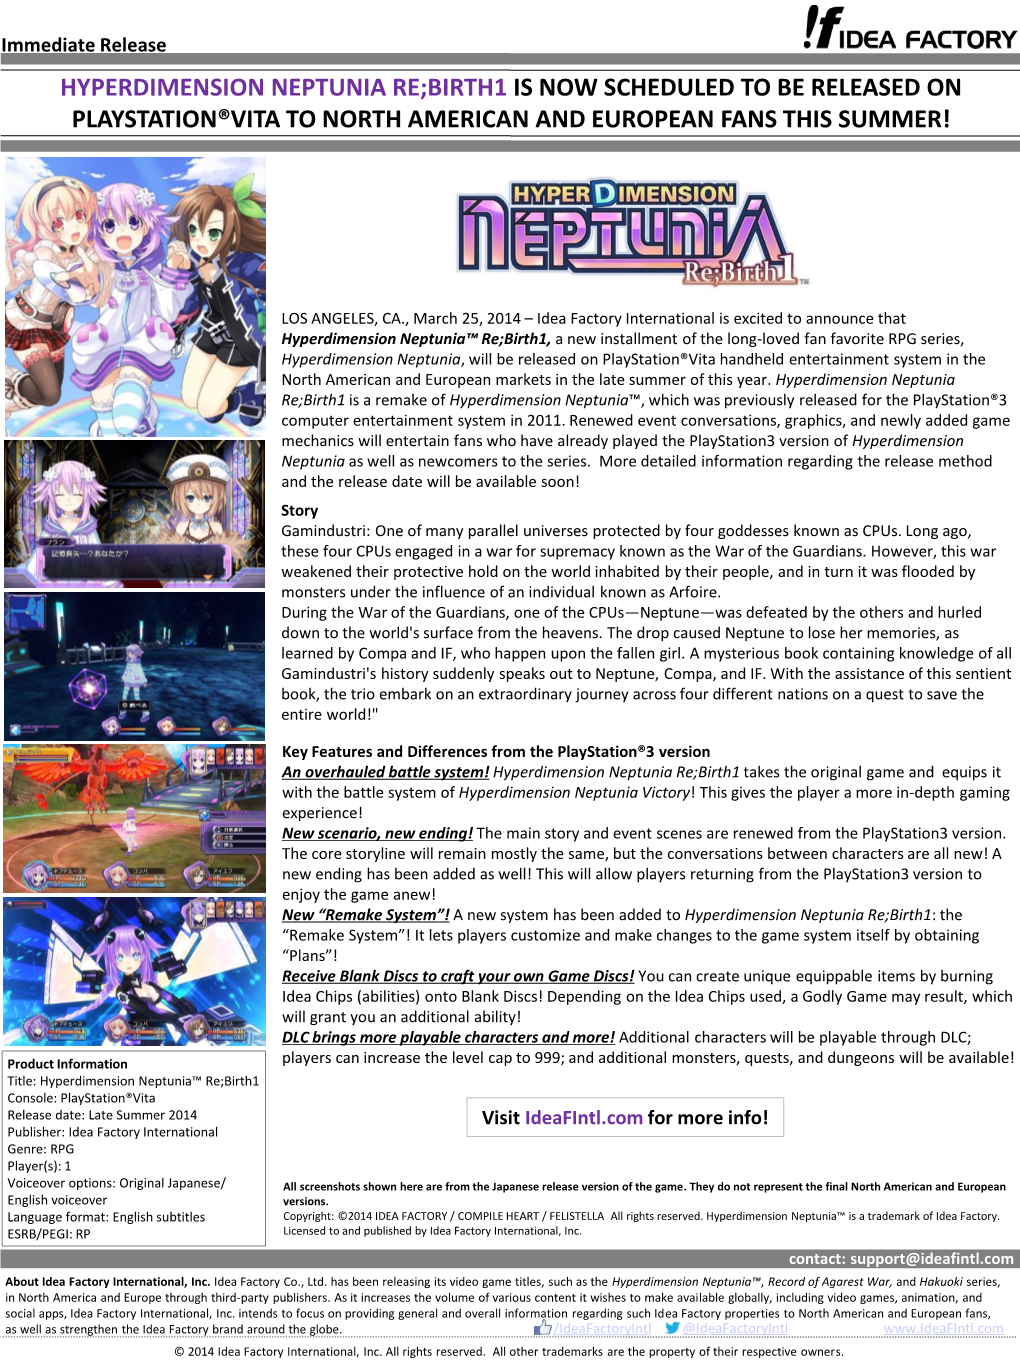 Hyperdimension Neptunia Re;Birth1 Is Now Scheduled to Be Released on Playstation®Vita to North American and European Fans This Summer!